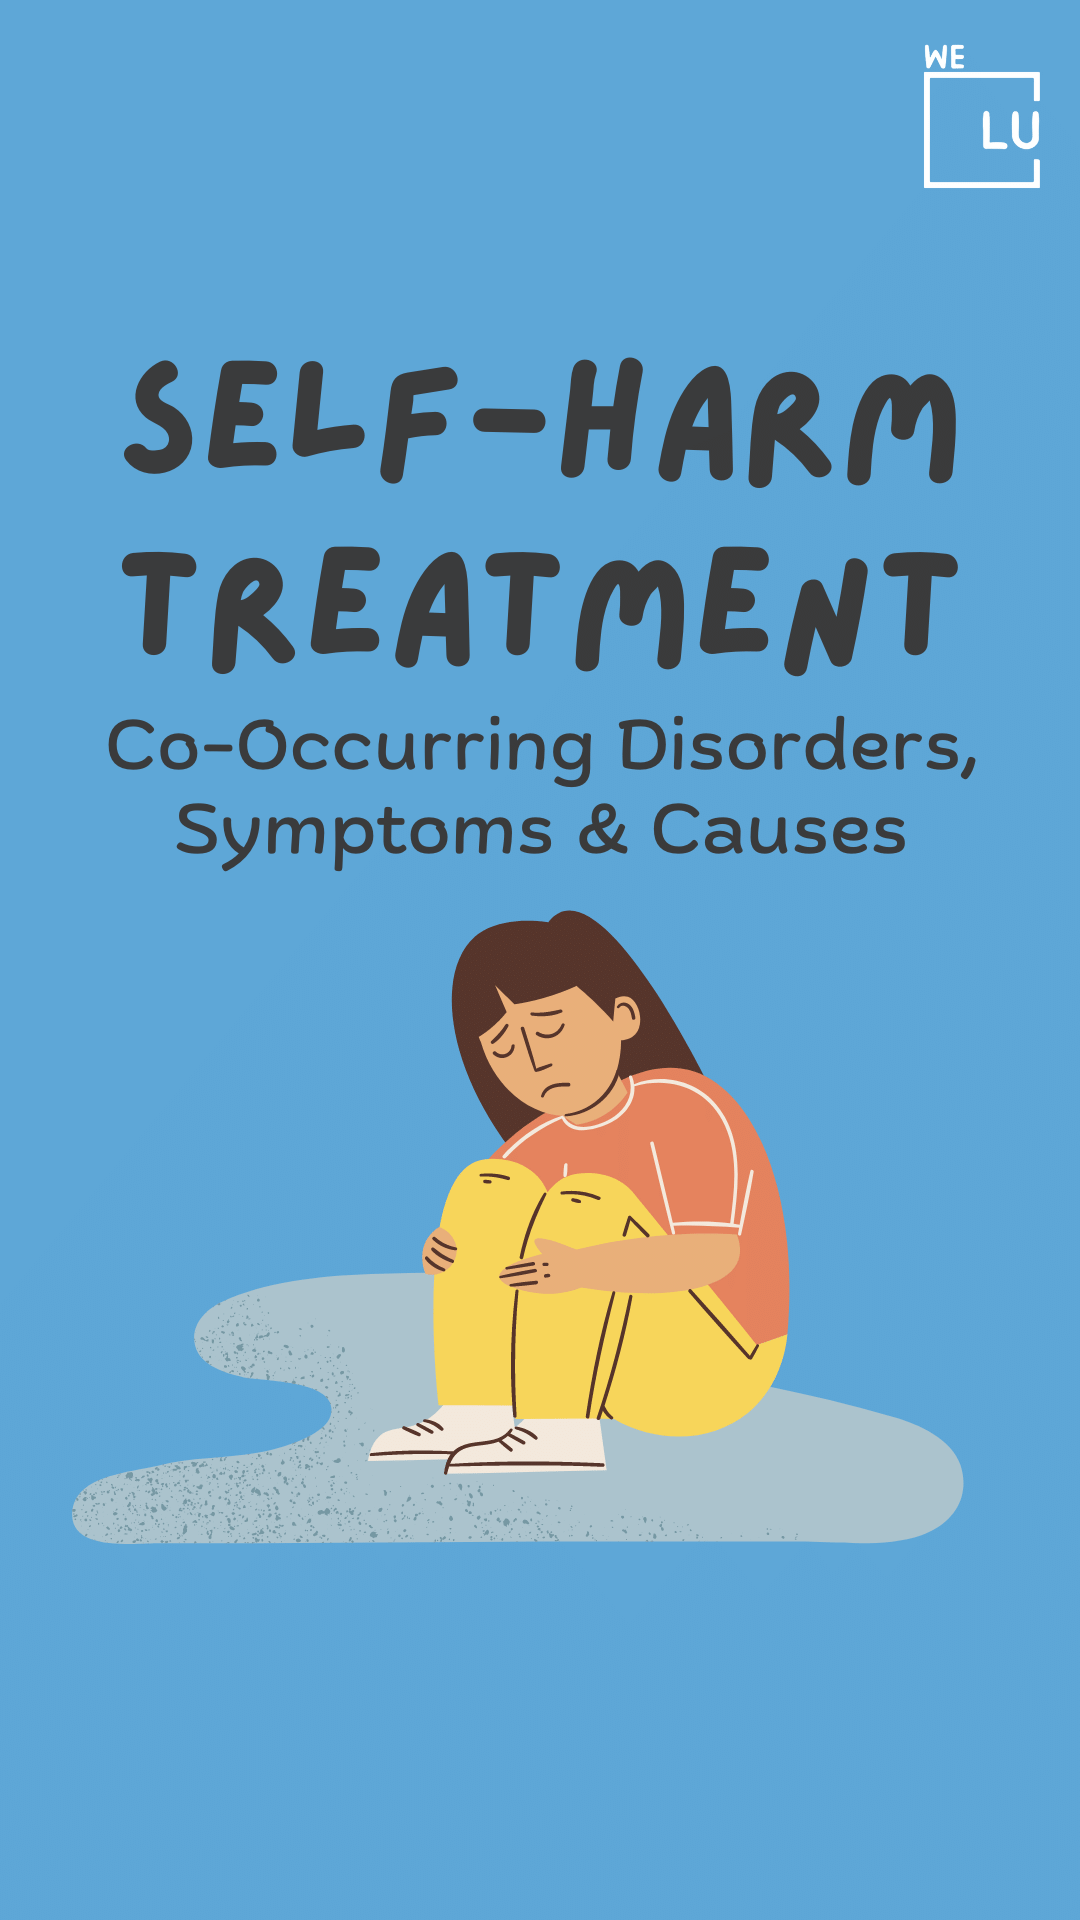 There are effective treatments for self harm that can allow a person to feel in control again. Psychotherapy is important to any self harm treatment plan. Self-harm may feel necessary to manage emotions, so a person will need to learn new coping mechanisms. We Level Up FL can assess suitability for self harm treatments.